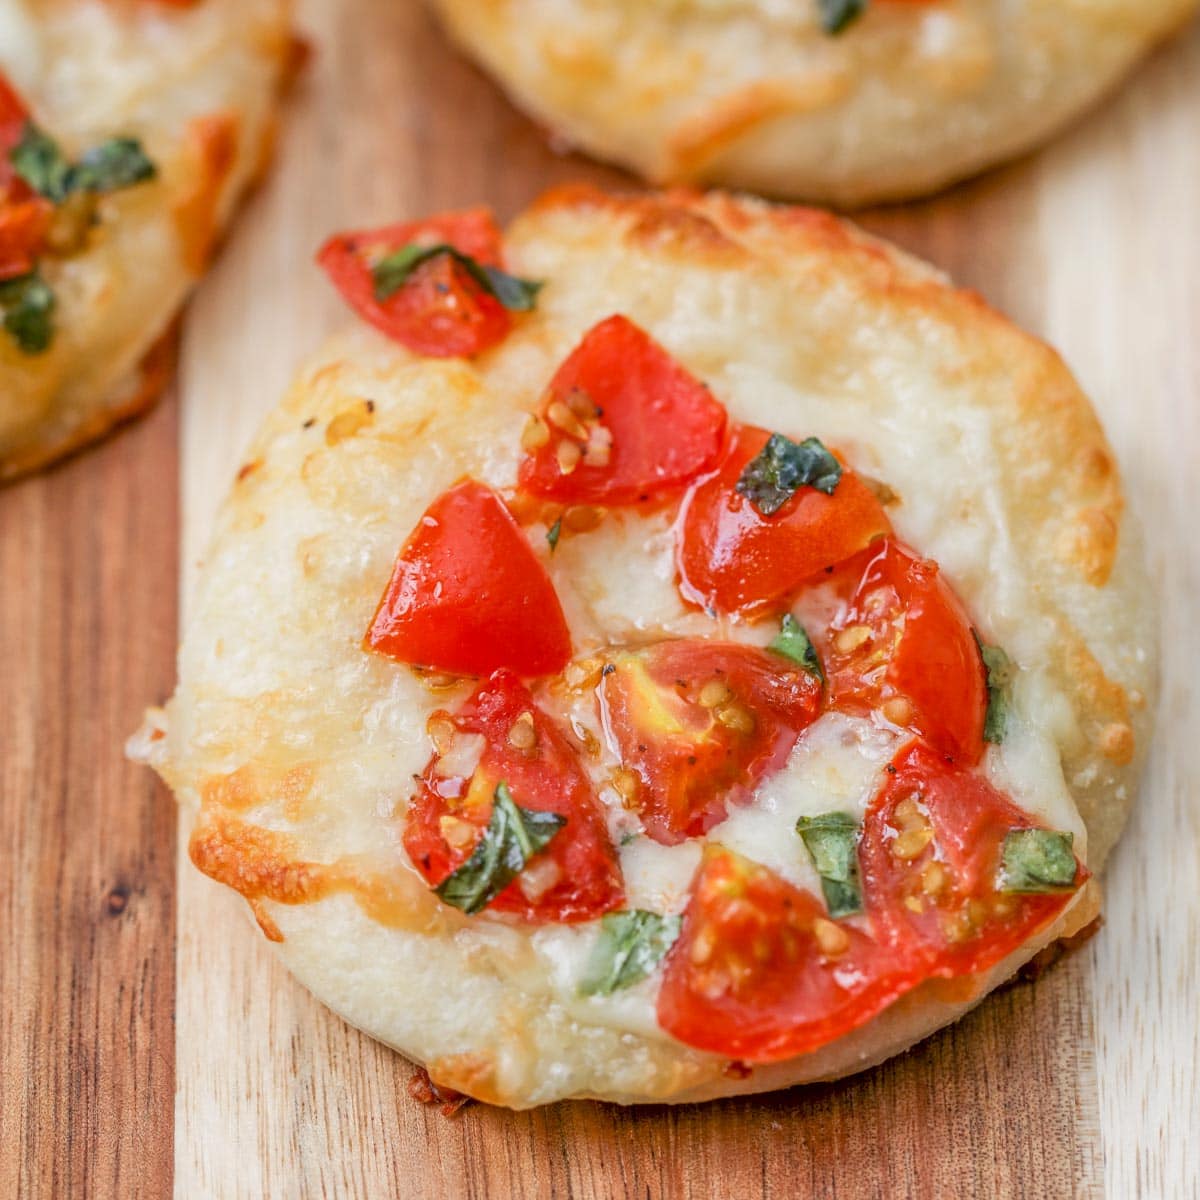 Quick dinner ideas - mini pizzas topped with tomato.